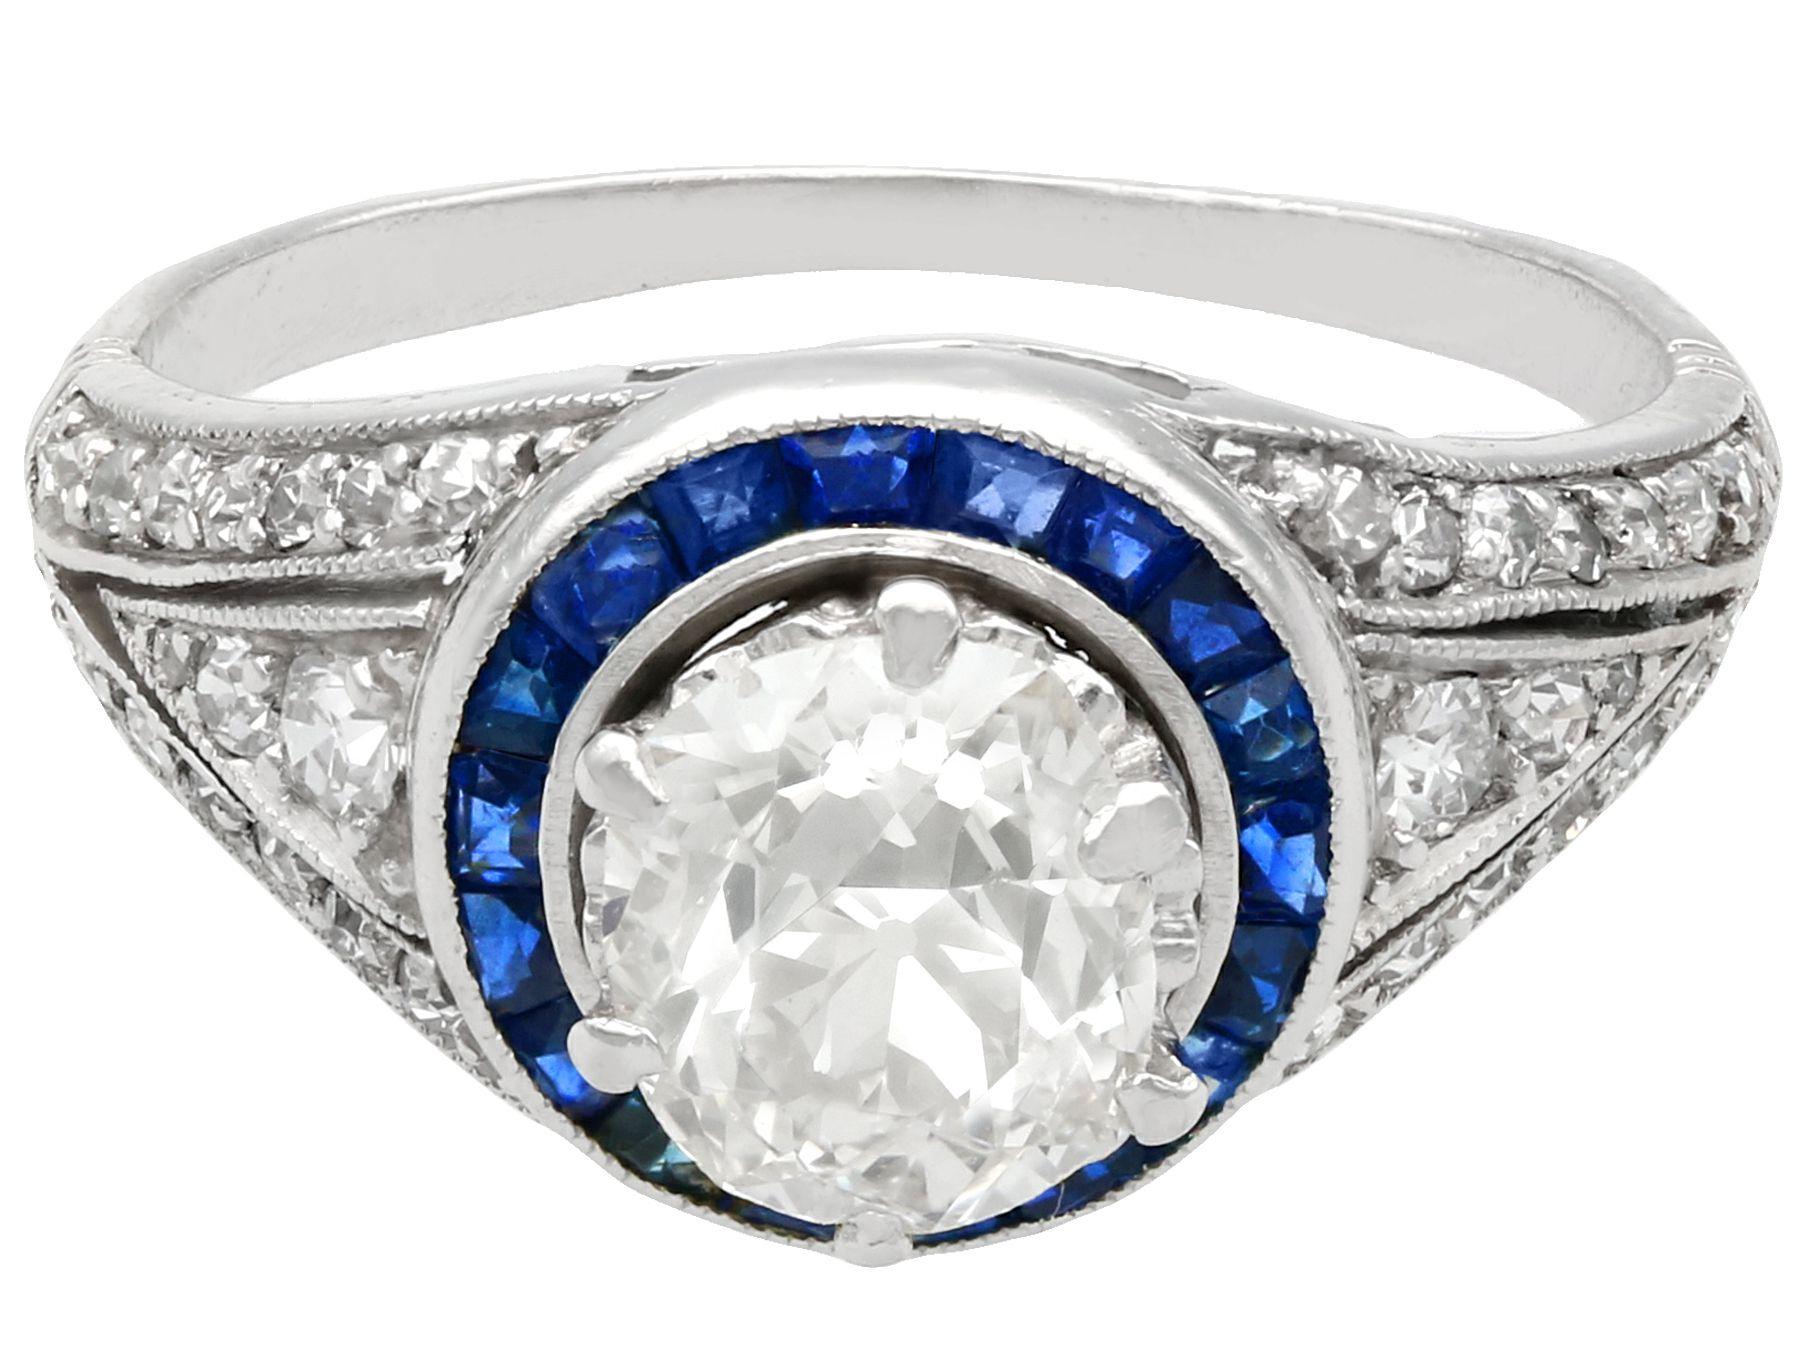 1930s Antique 2.59 Carat Diamond and Sapphire Platinum Cocktail Ring In Excellent Condition For Sale In Jesmond, Newcastle Upon Tyne